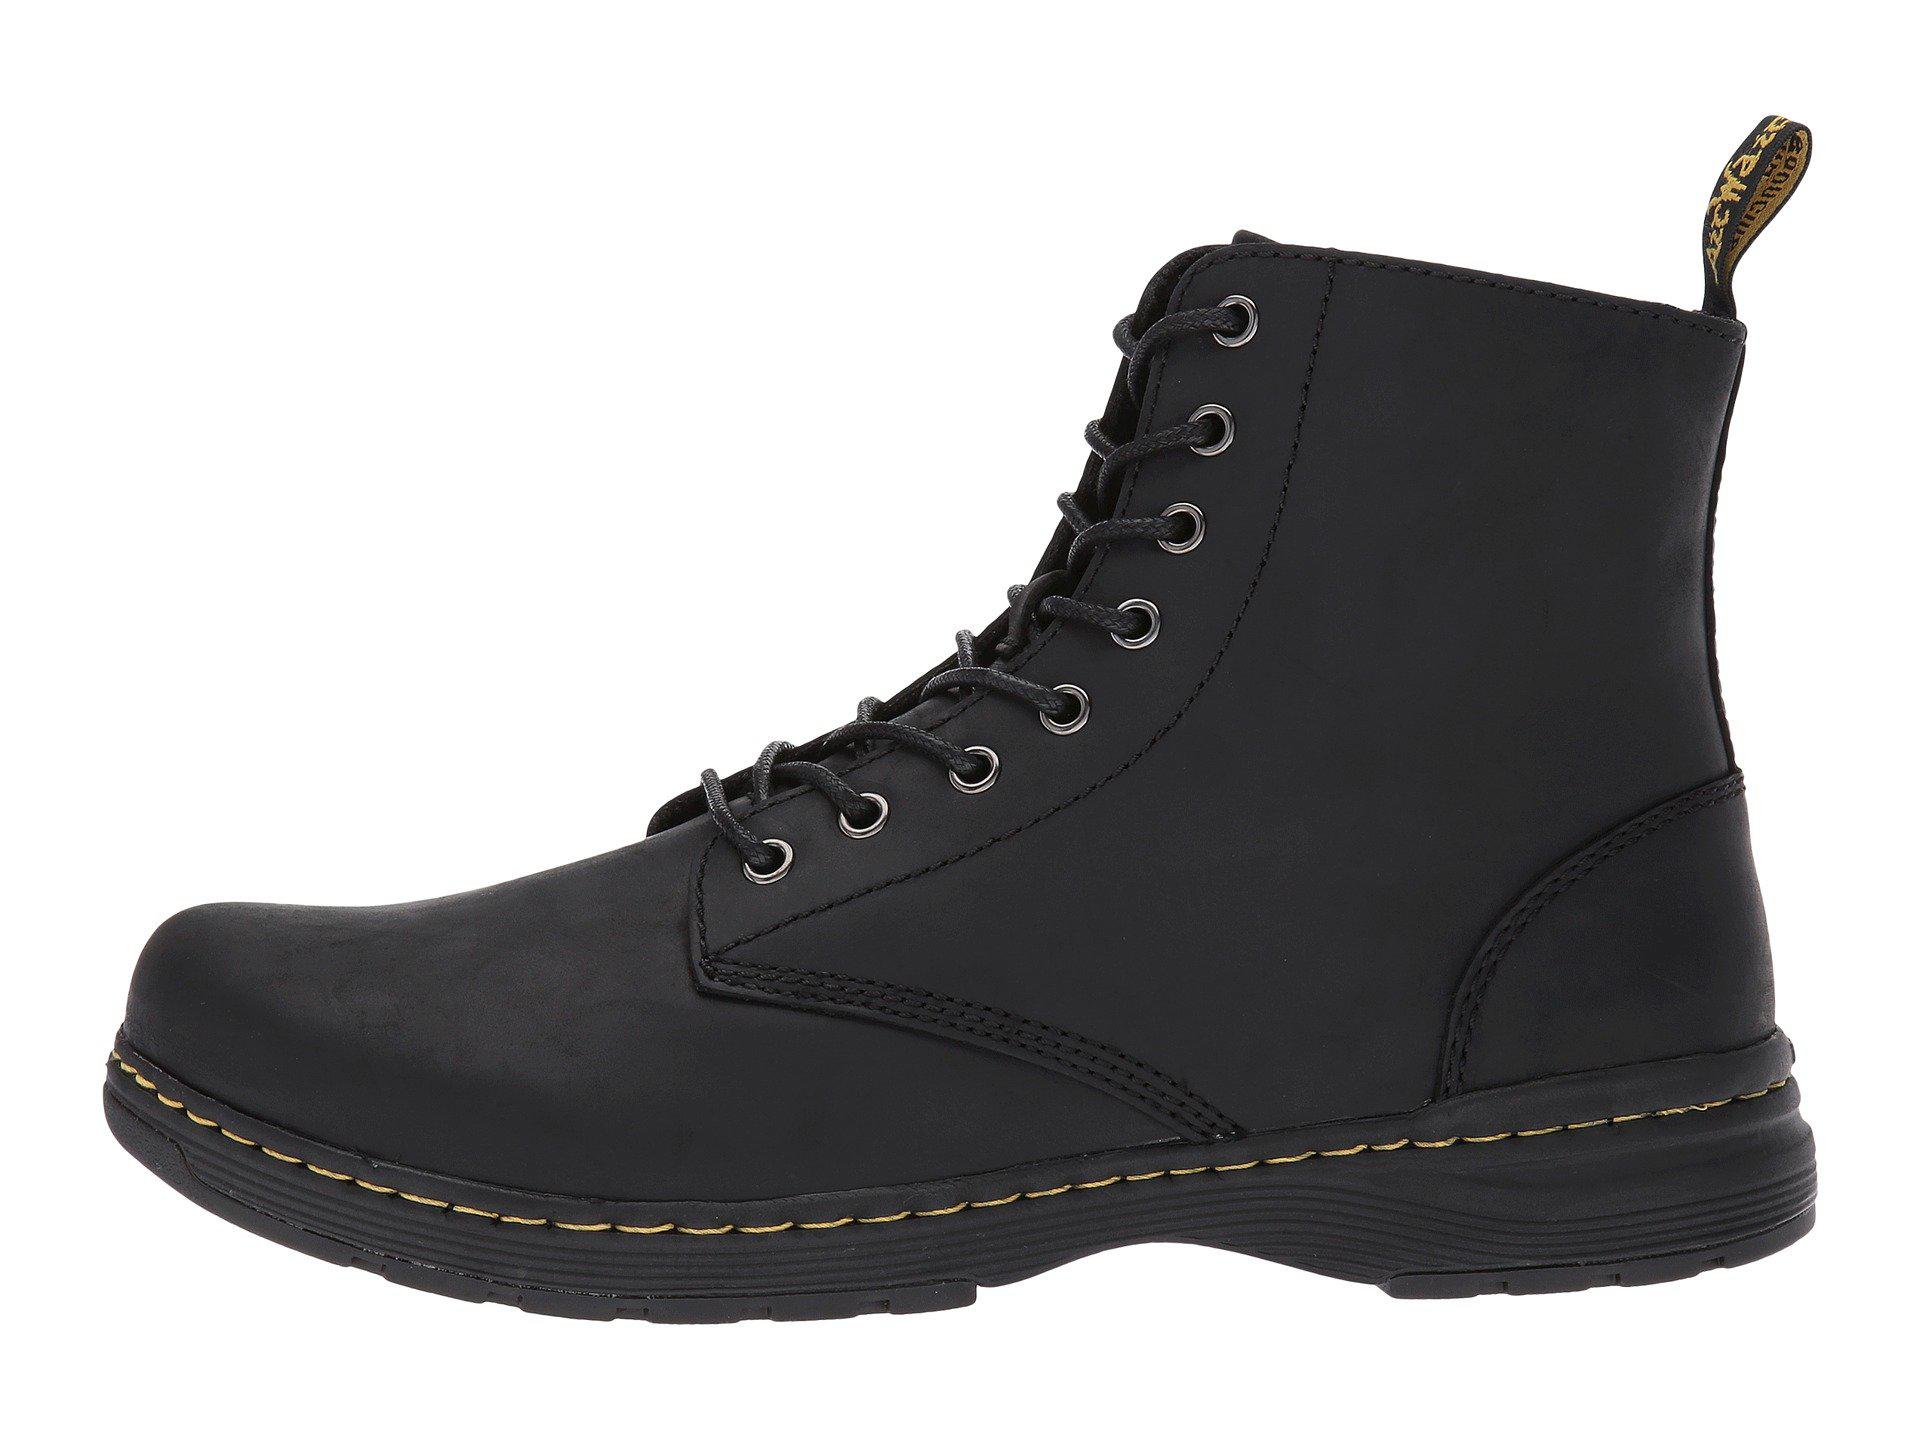 Dr. Martens Leather Monty 8-eye Boot in 